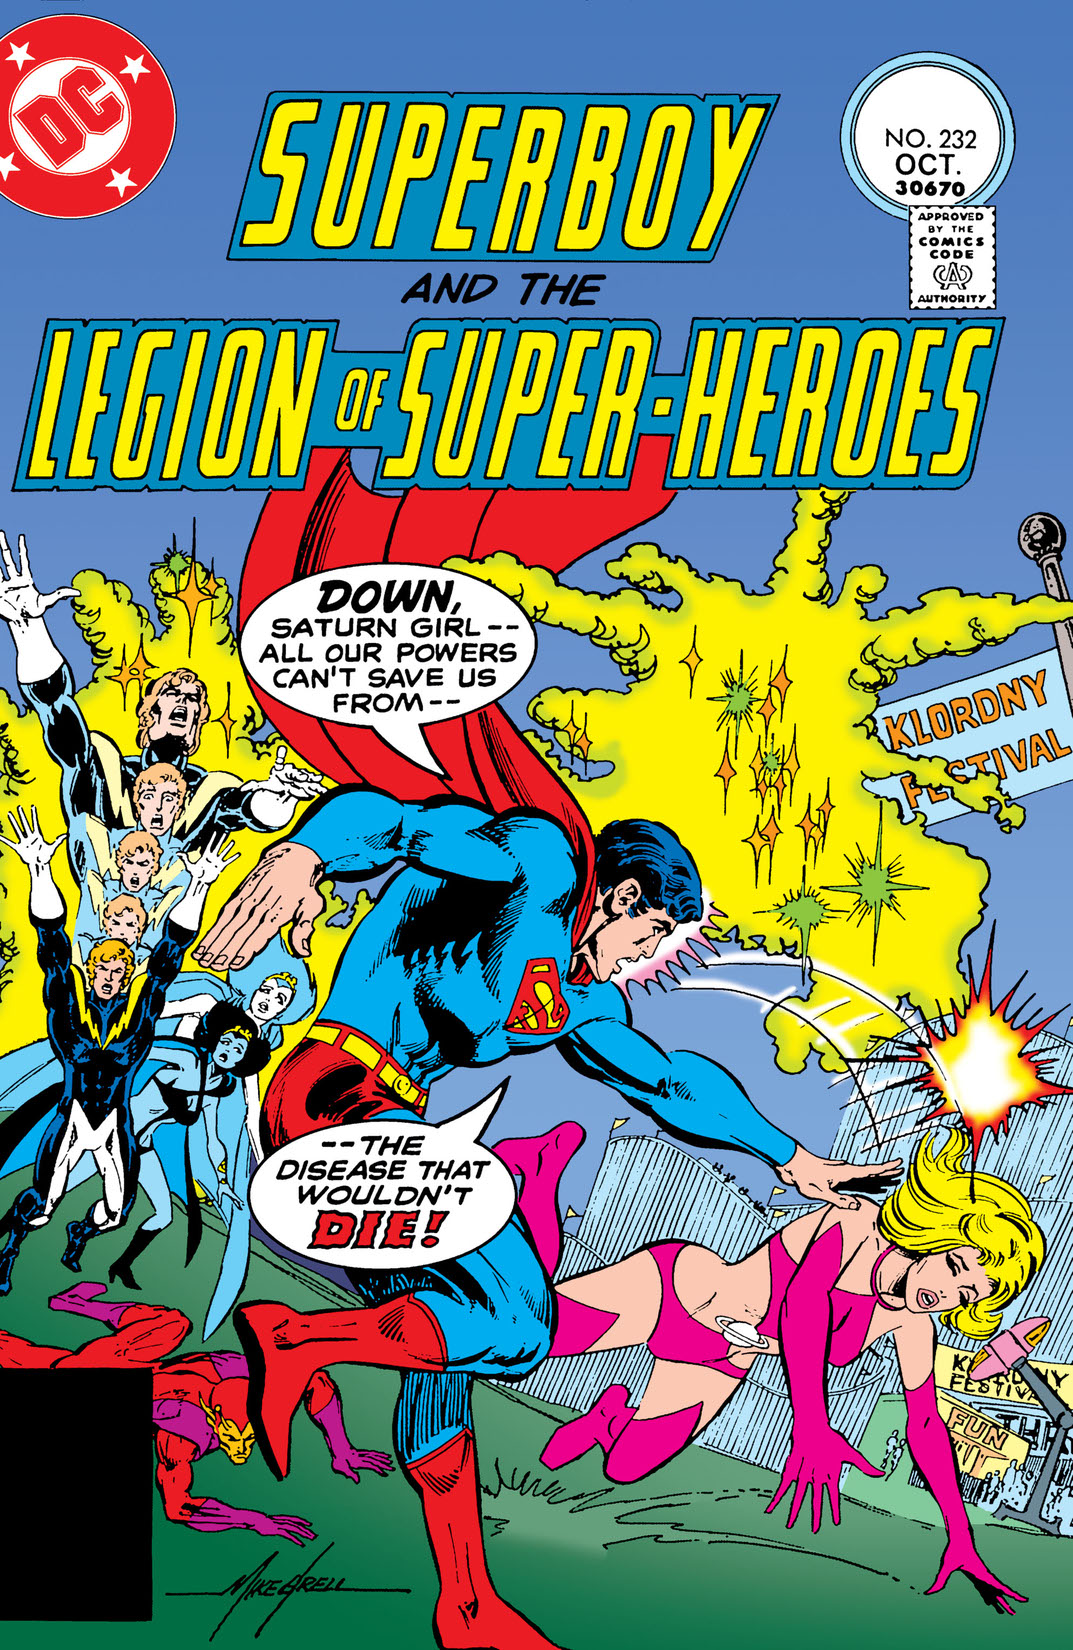 Superboy and the Legion of Super-Heroes (1977-) #232 preview images